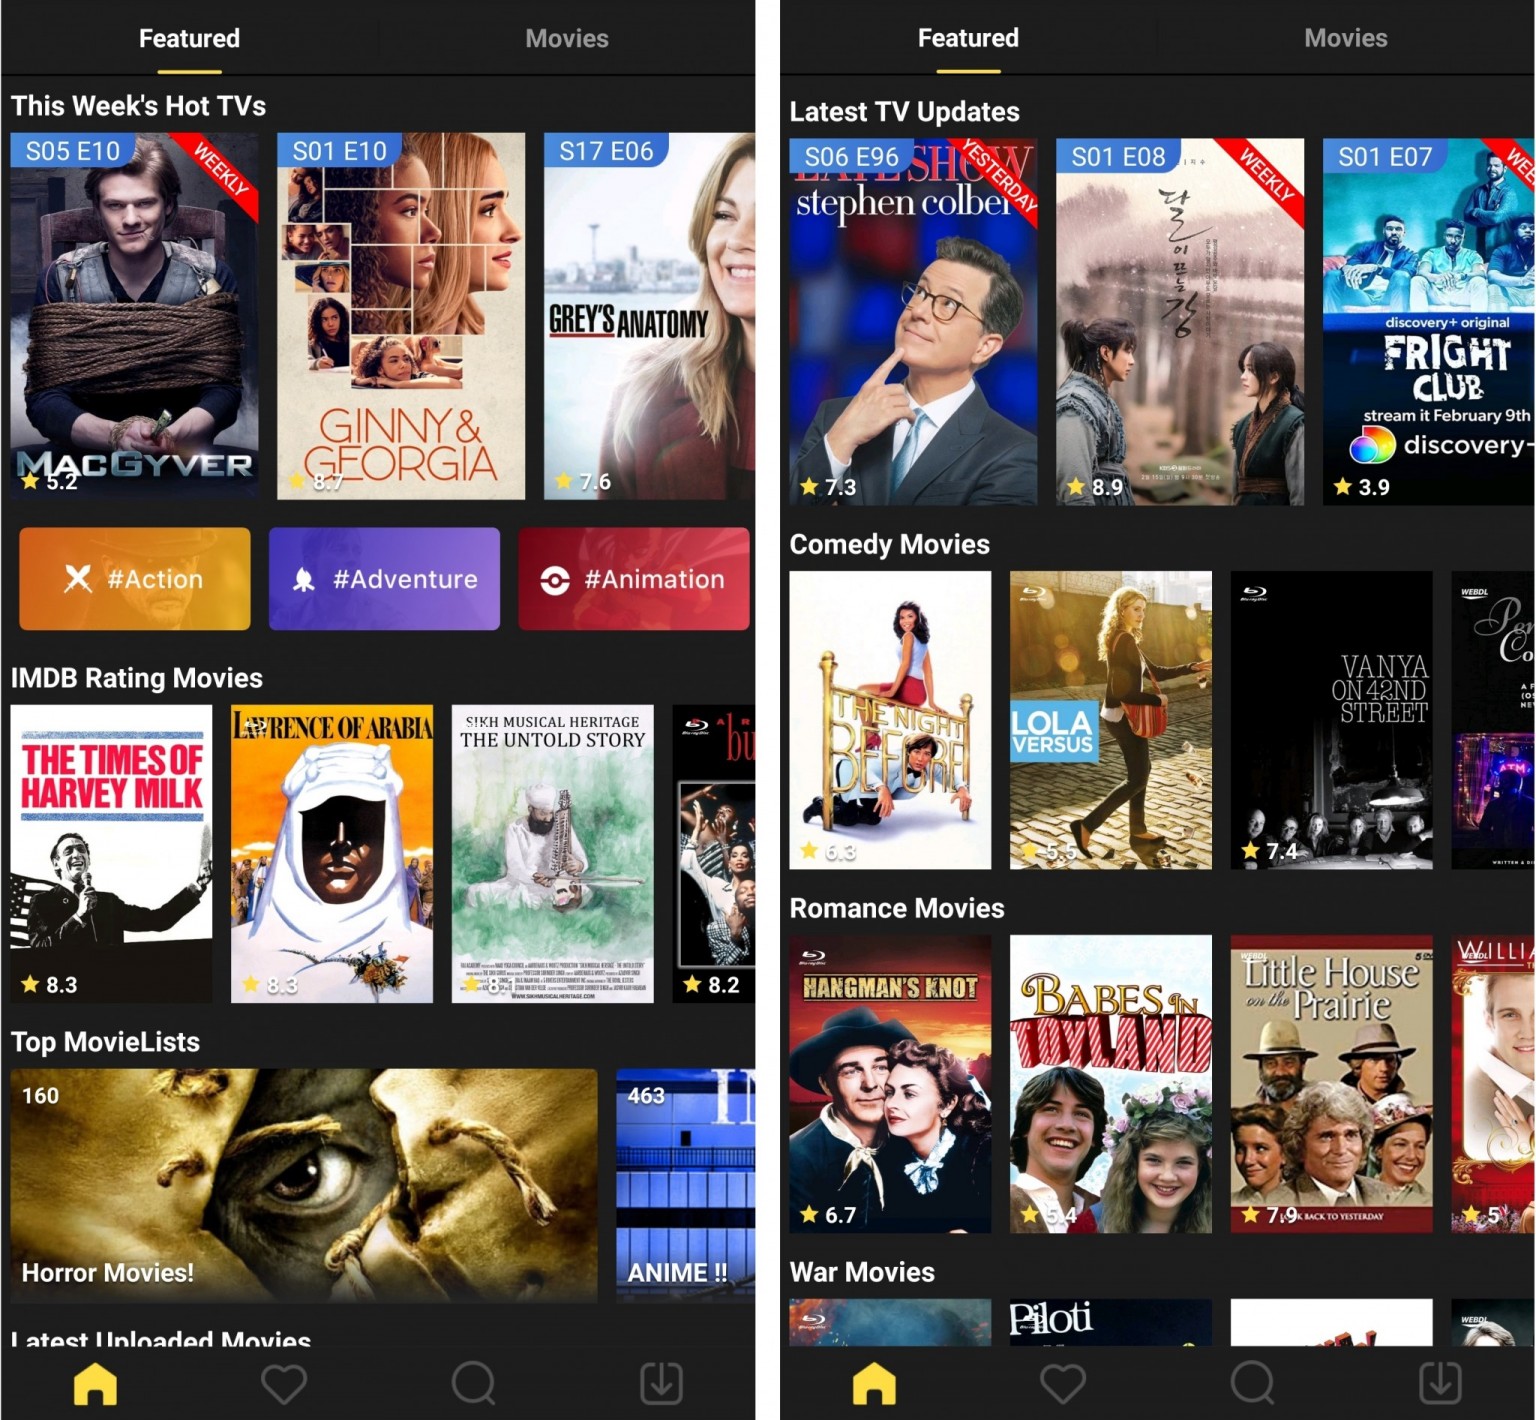 MovieBox Pro App APK Download For Android - Latest (11 Aug 22)